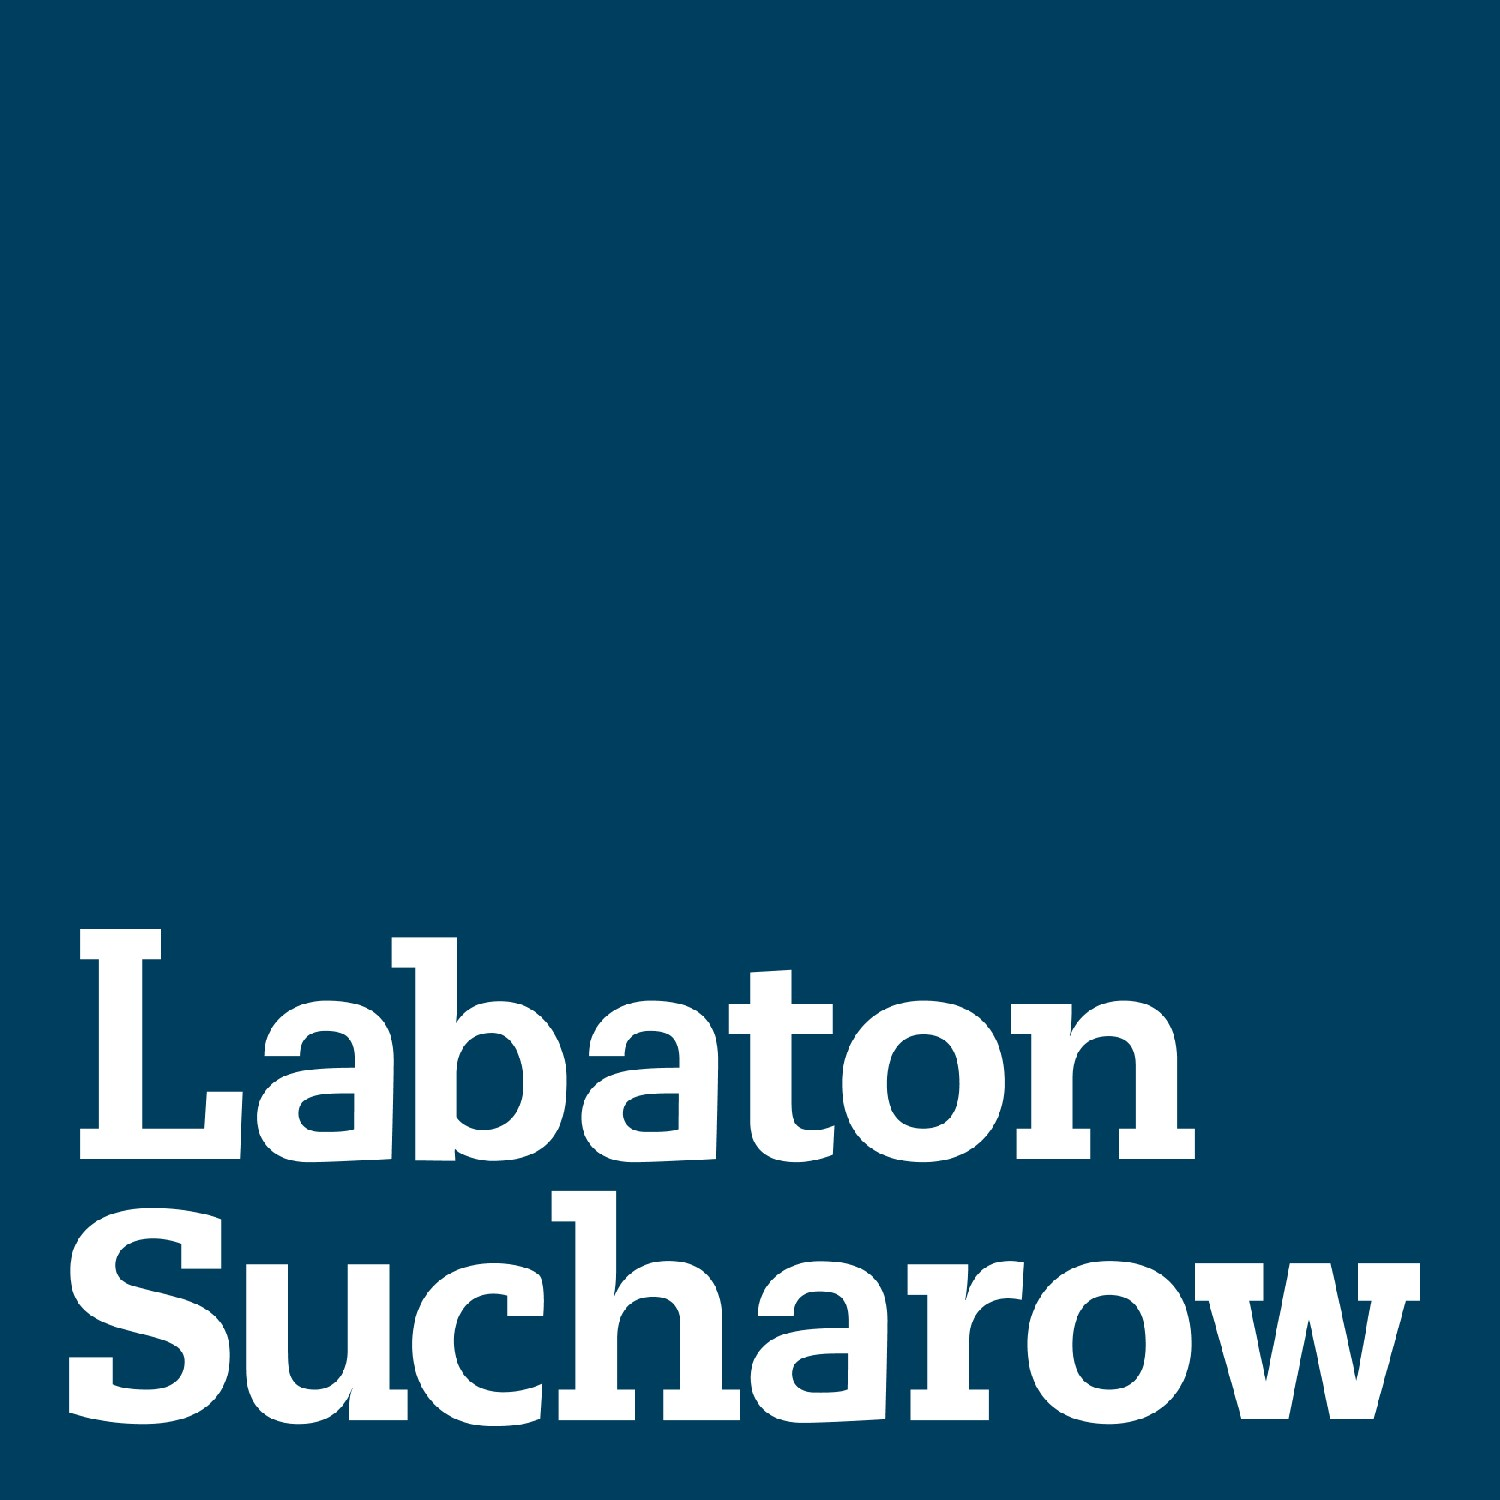 Labaton Sucharow LLP, Tuesday, April 27, 2021, Press release picture